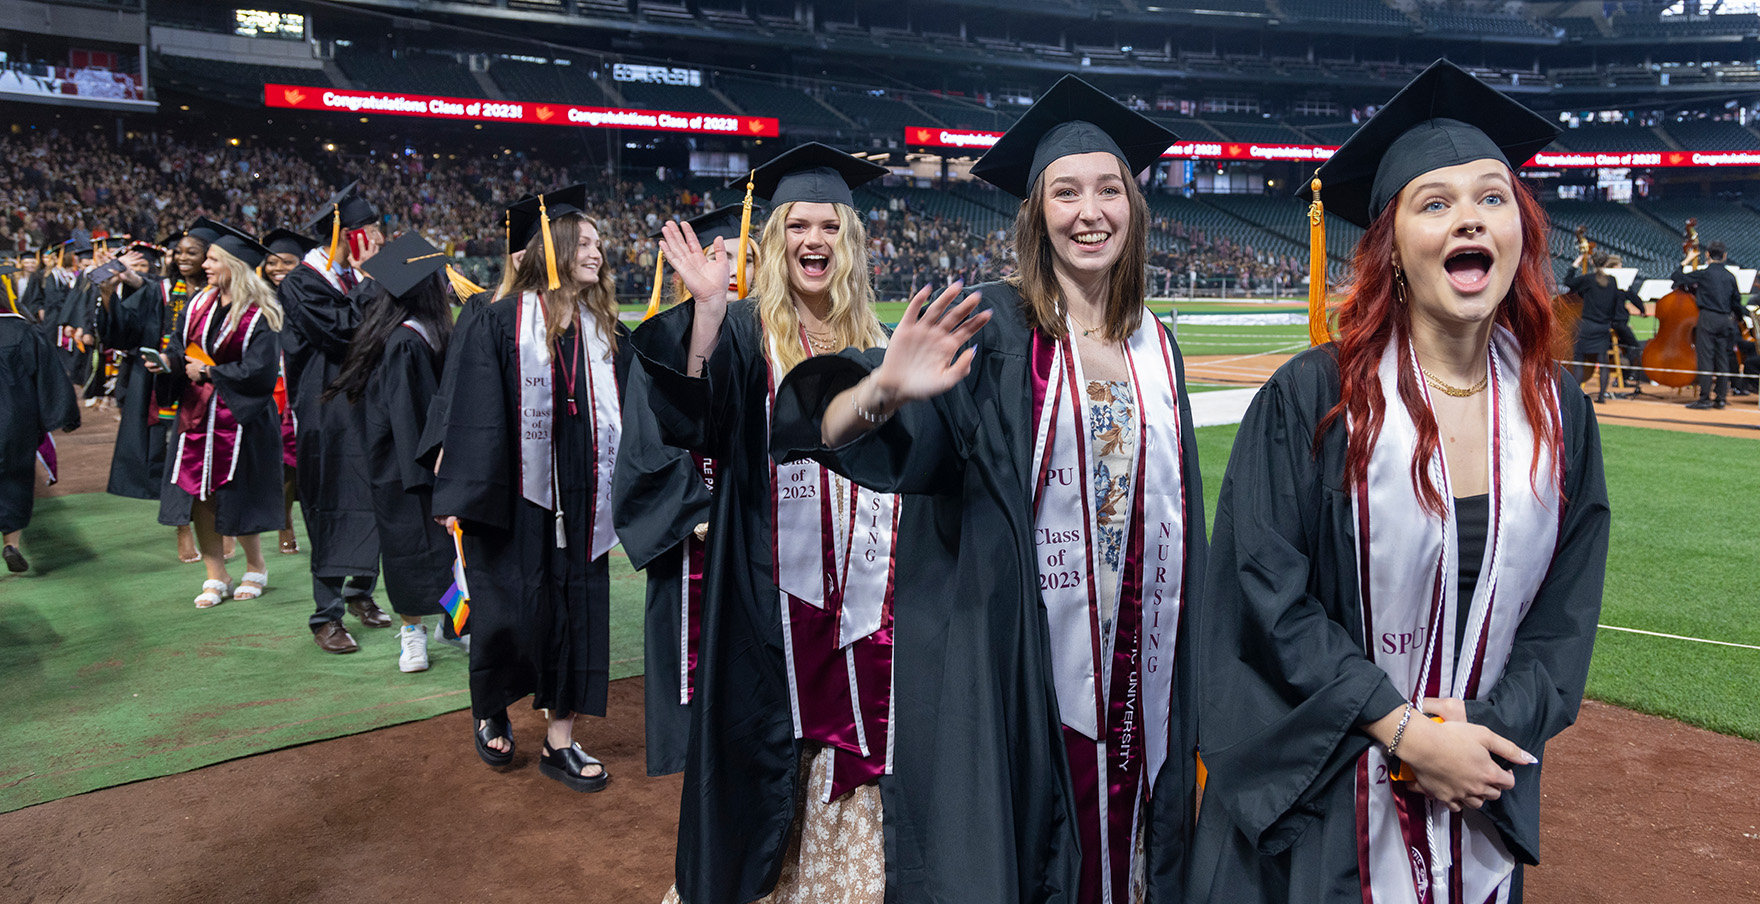 SPU grads line up at T-mobile Park | photo by Mike Siegel